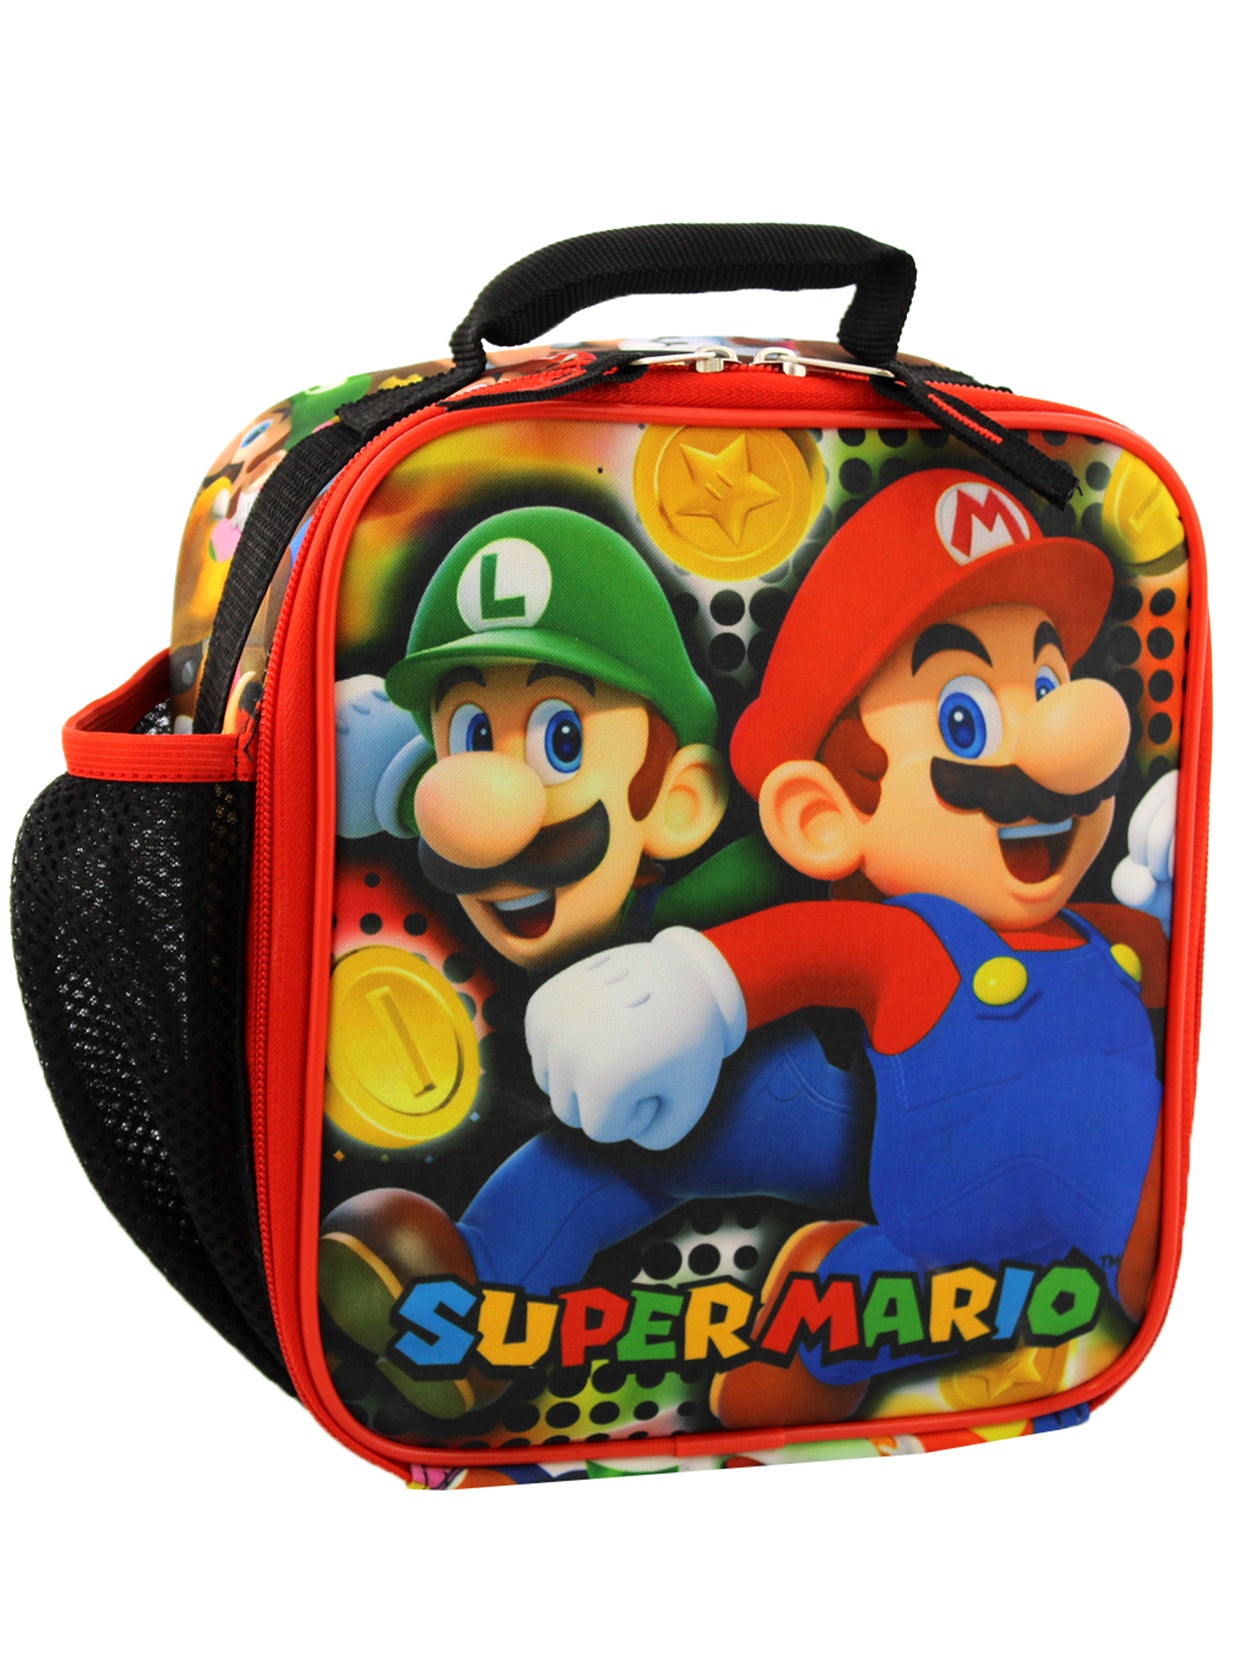 Super Mario Lunch Bag Kid's Insulated Lunch Box Waterproof – ILYBAG